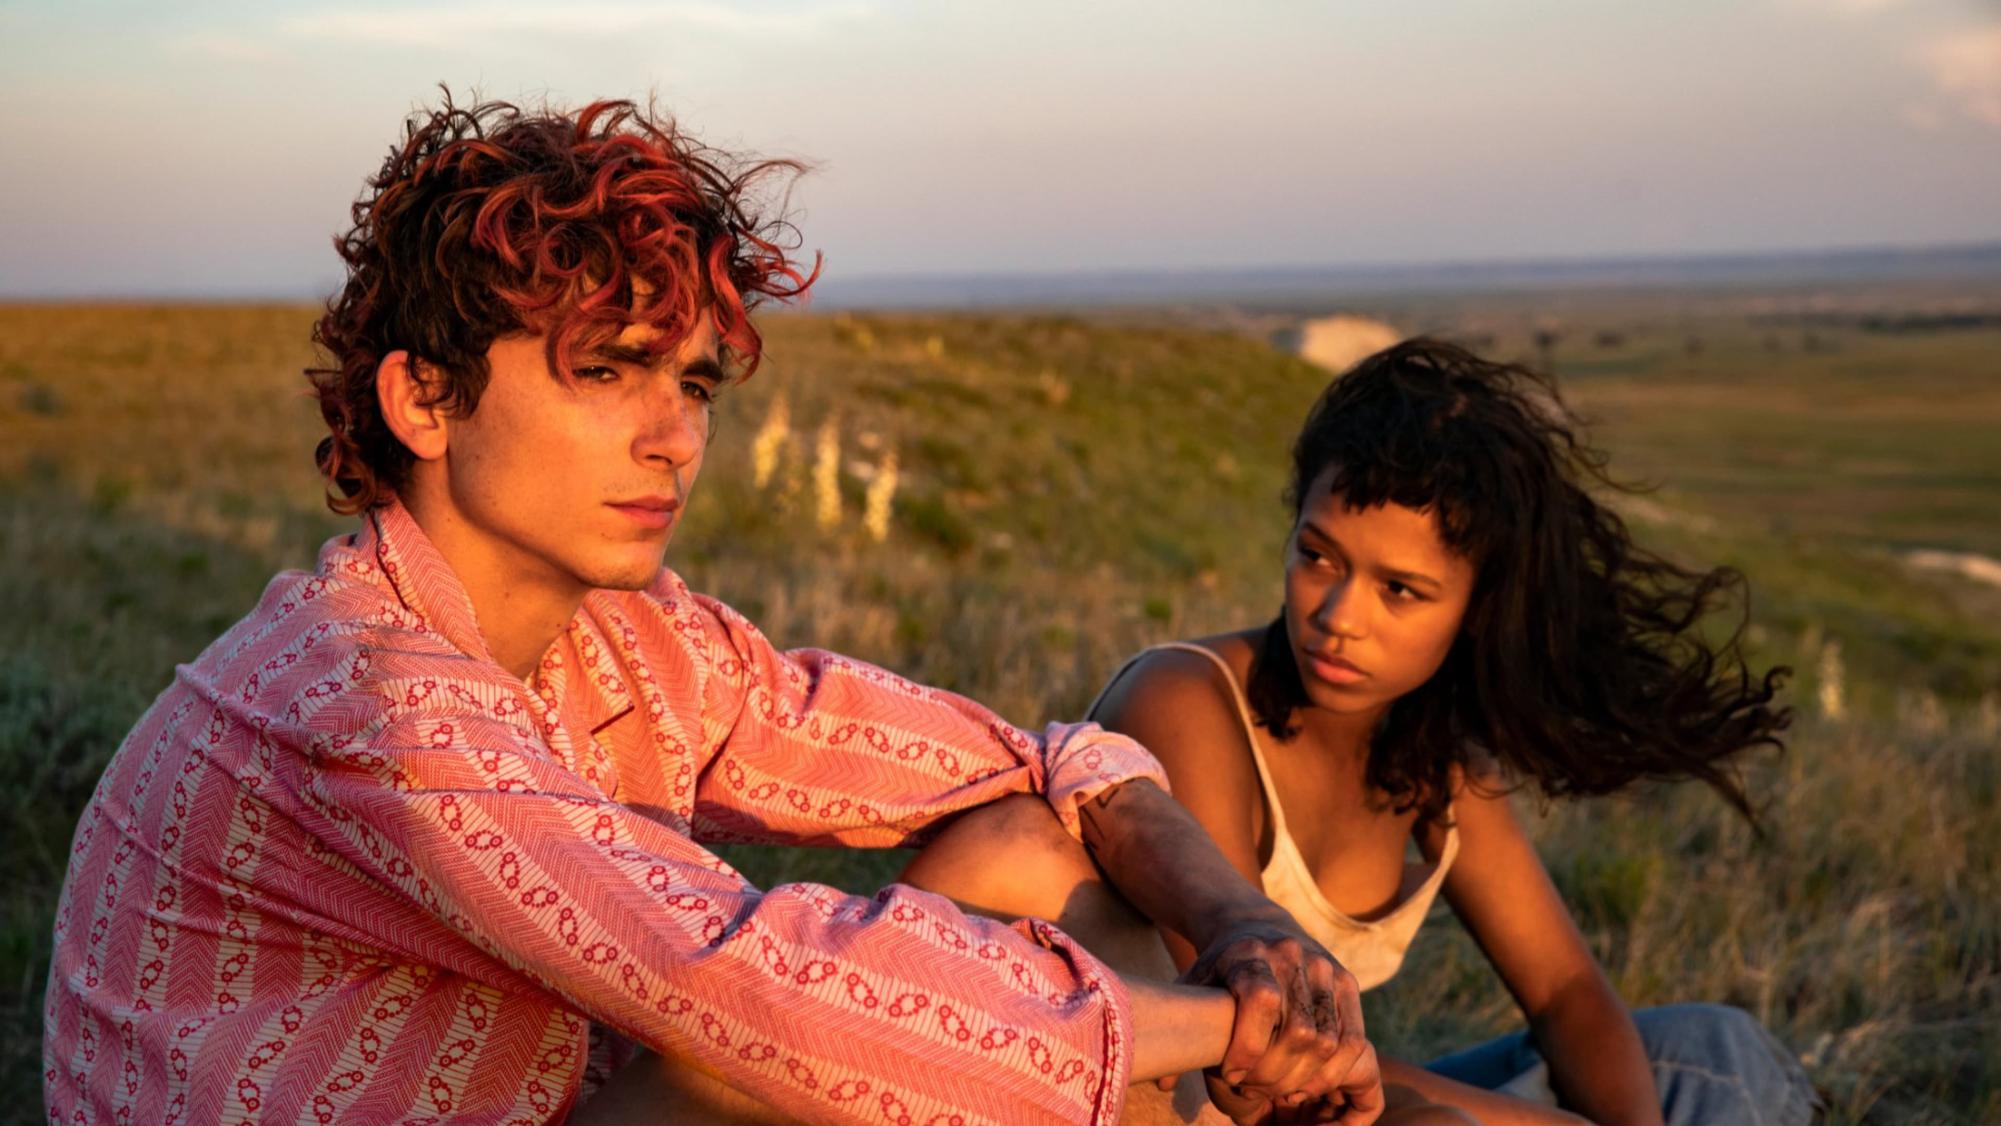 Lee (Timothee Chalamet) and Maren (Taylor Russell) are seen together somewhere in the plains of the Midwest in a still from the 2022 film Bones & All. 